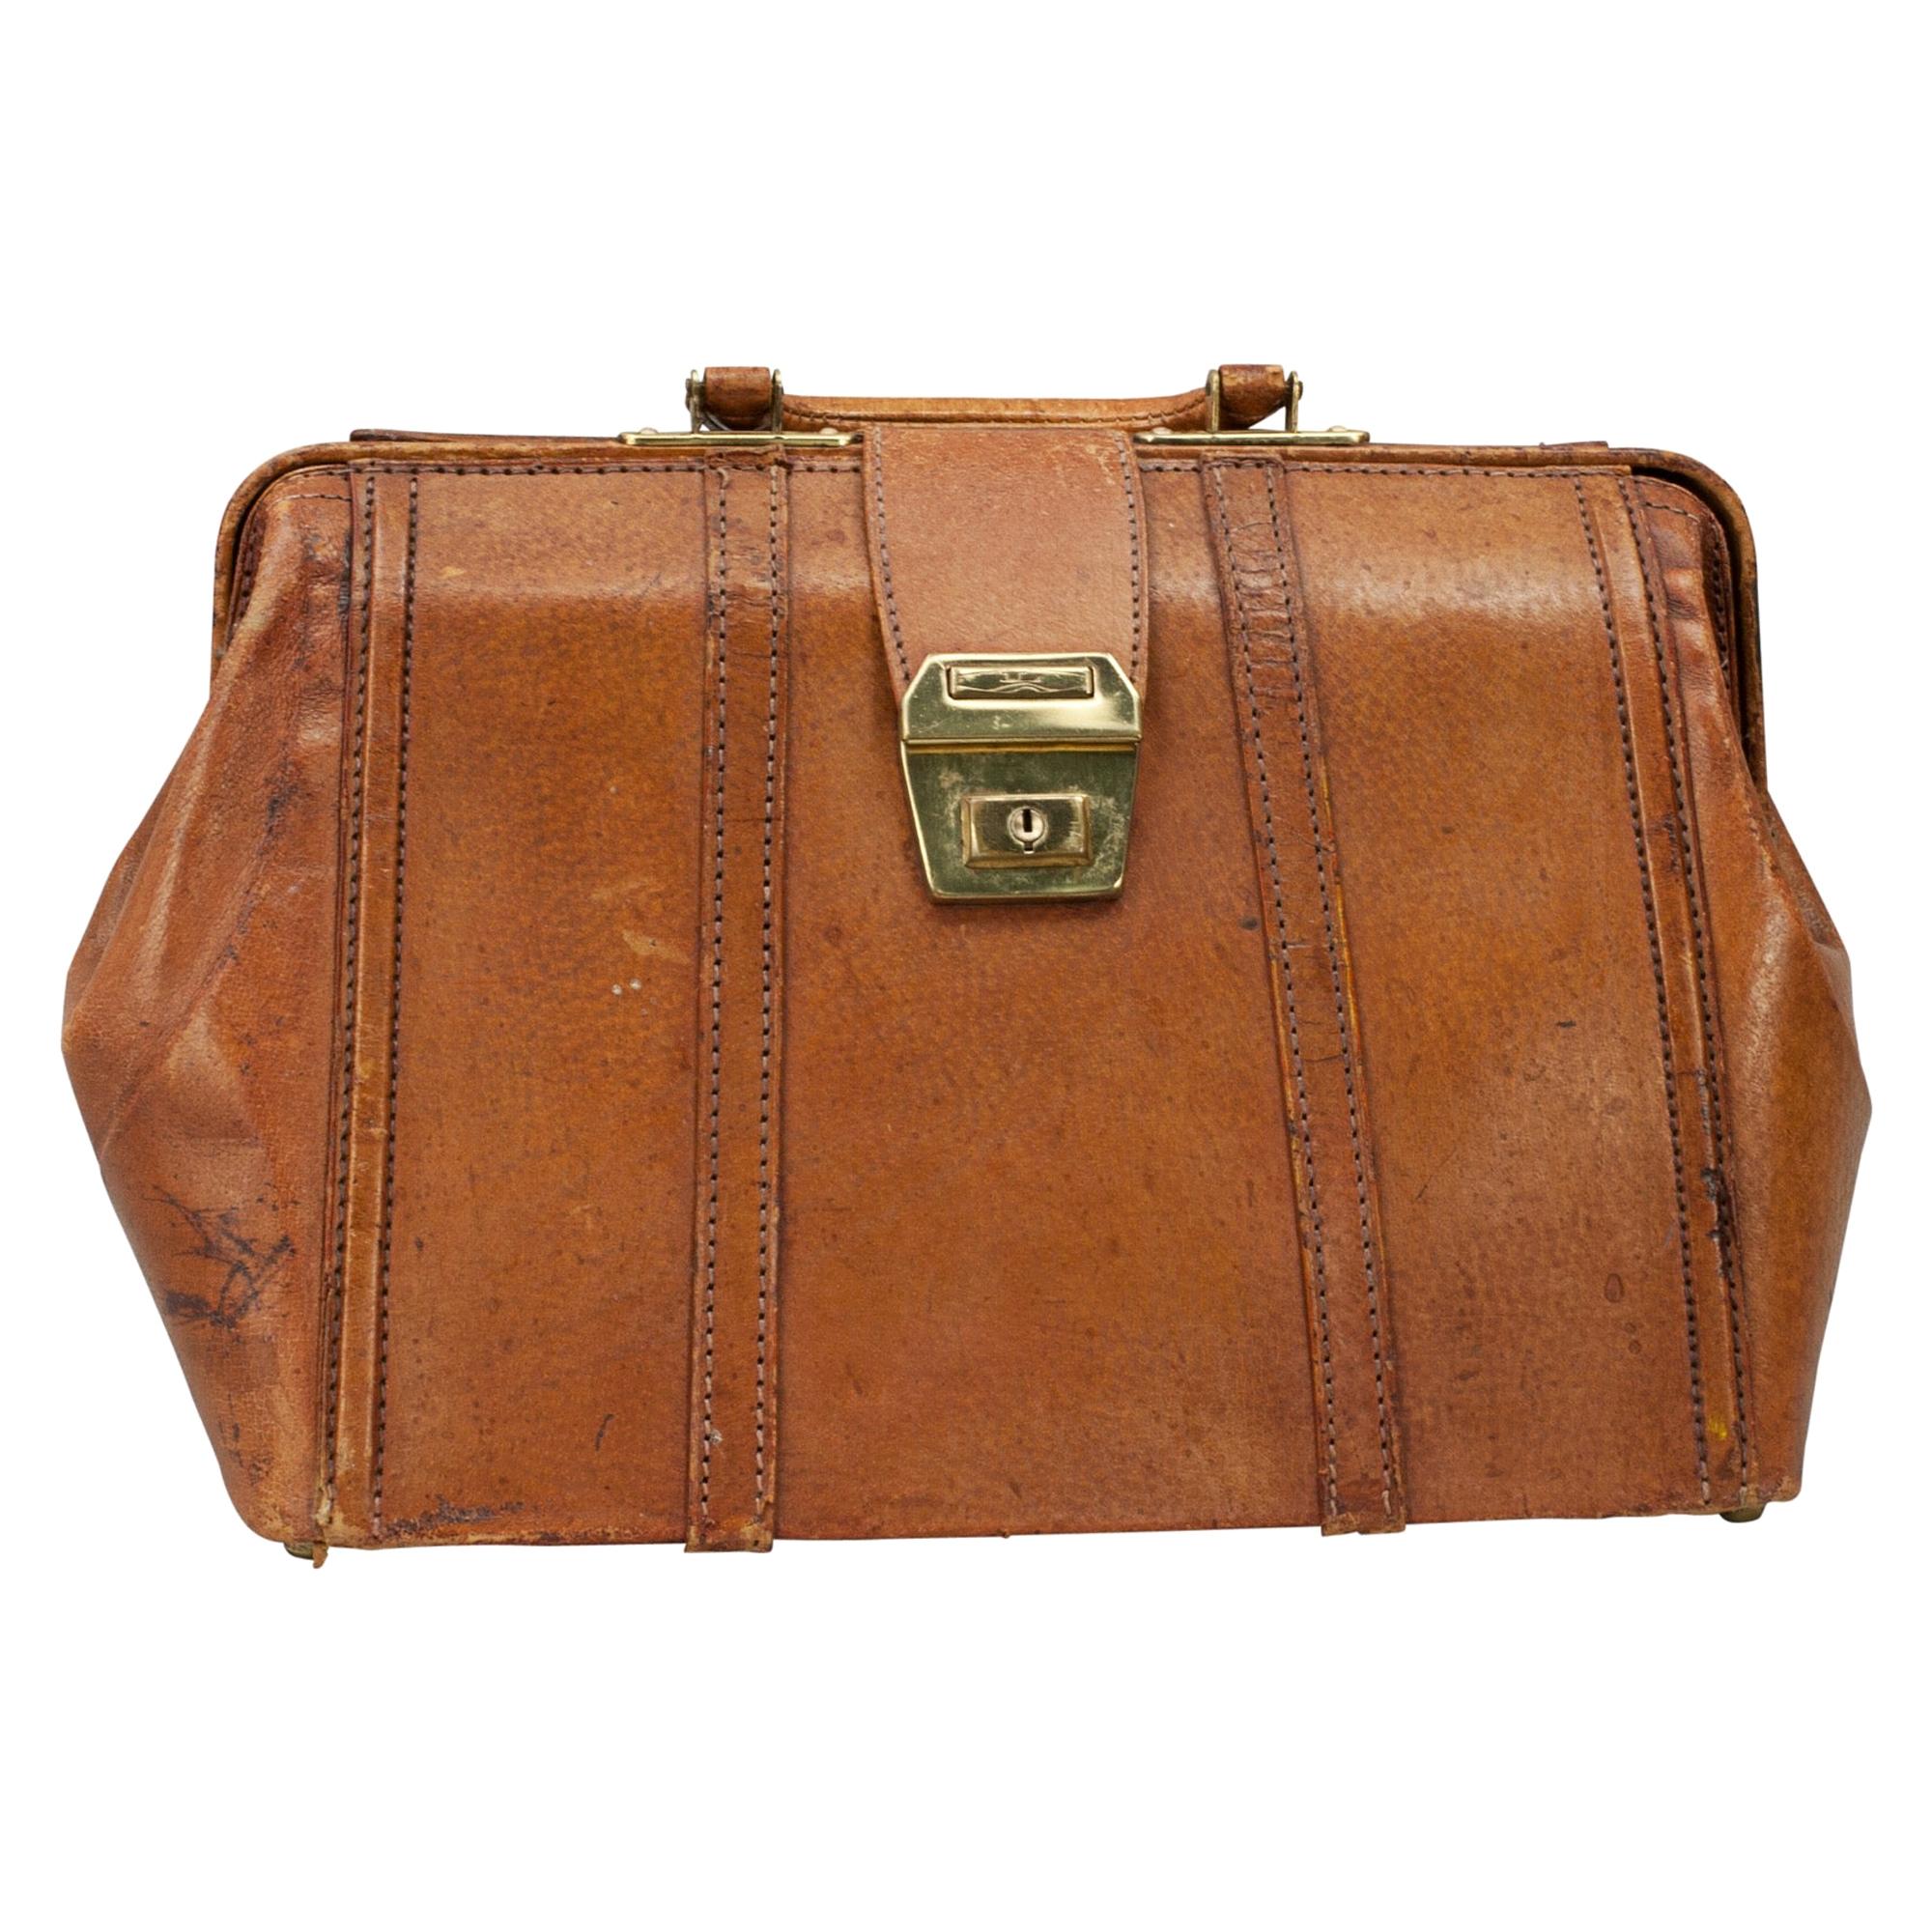 What were Gladstone bags used for?